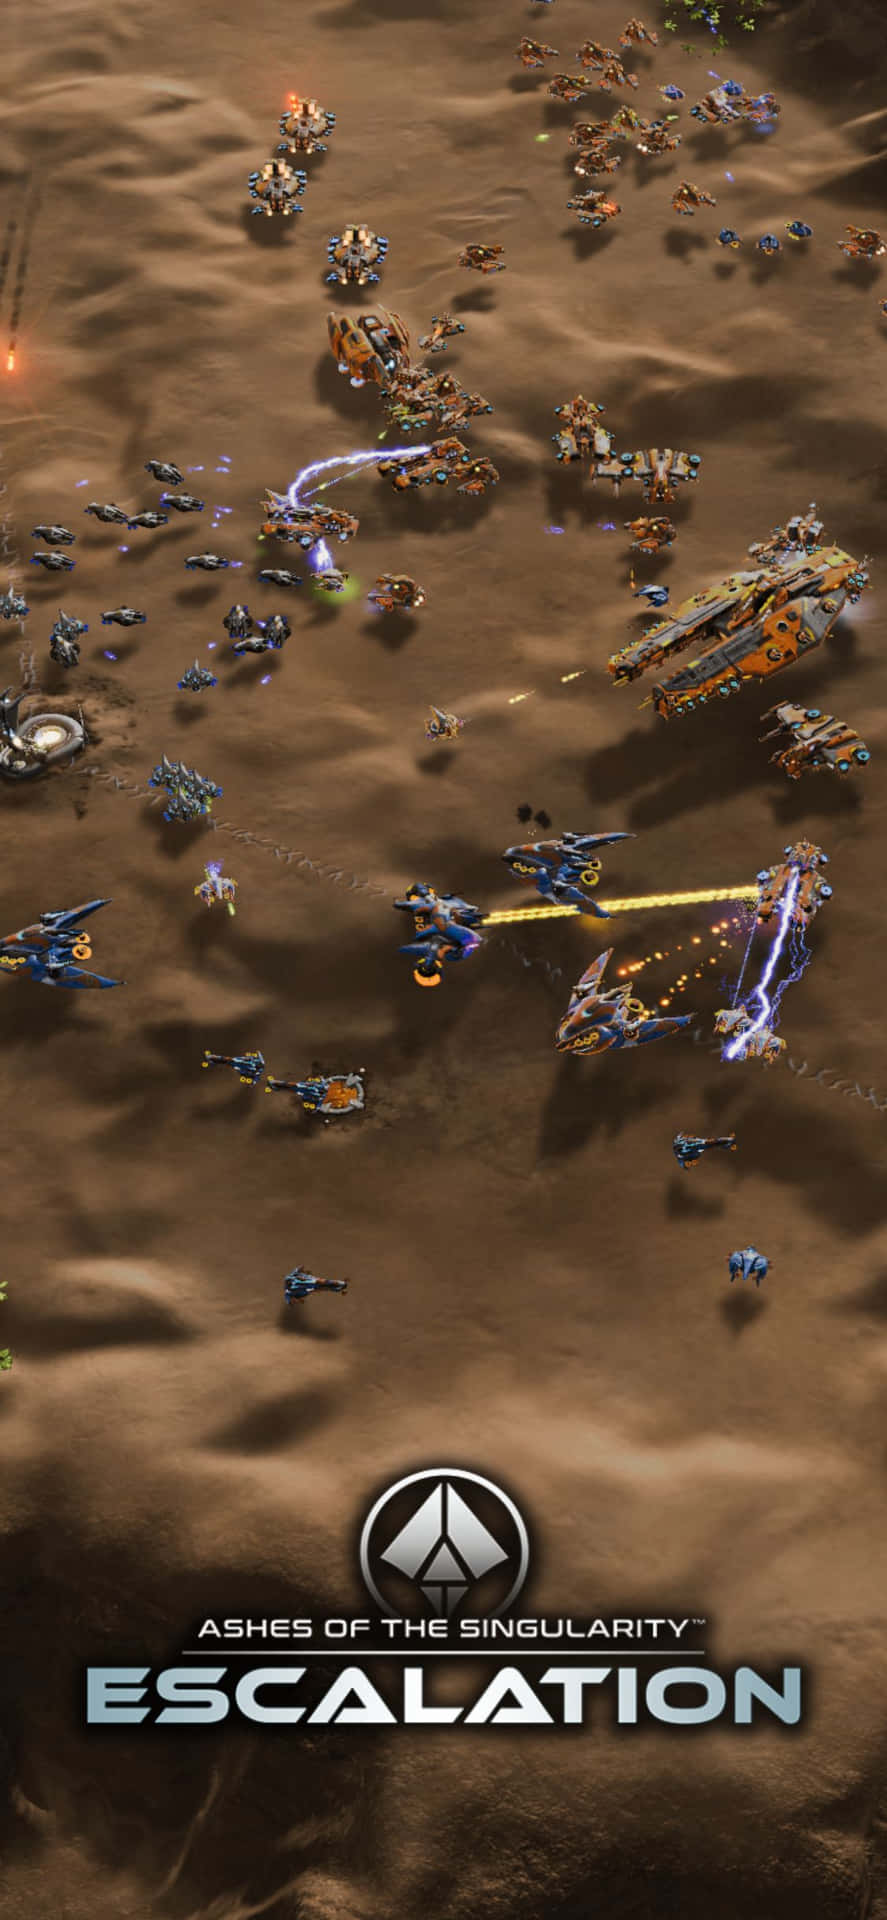 Unbelievably Detailed Graphics on the Iphone X with Ashes of the Singularity Escalation